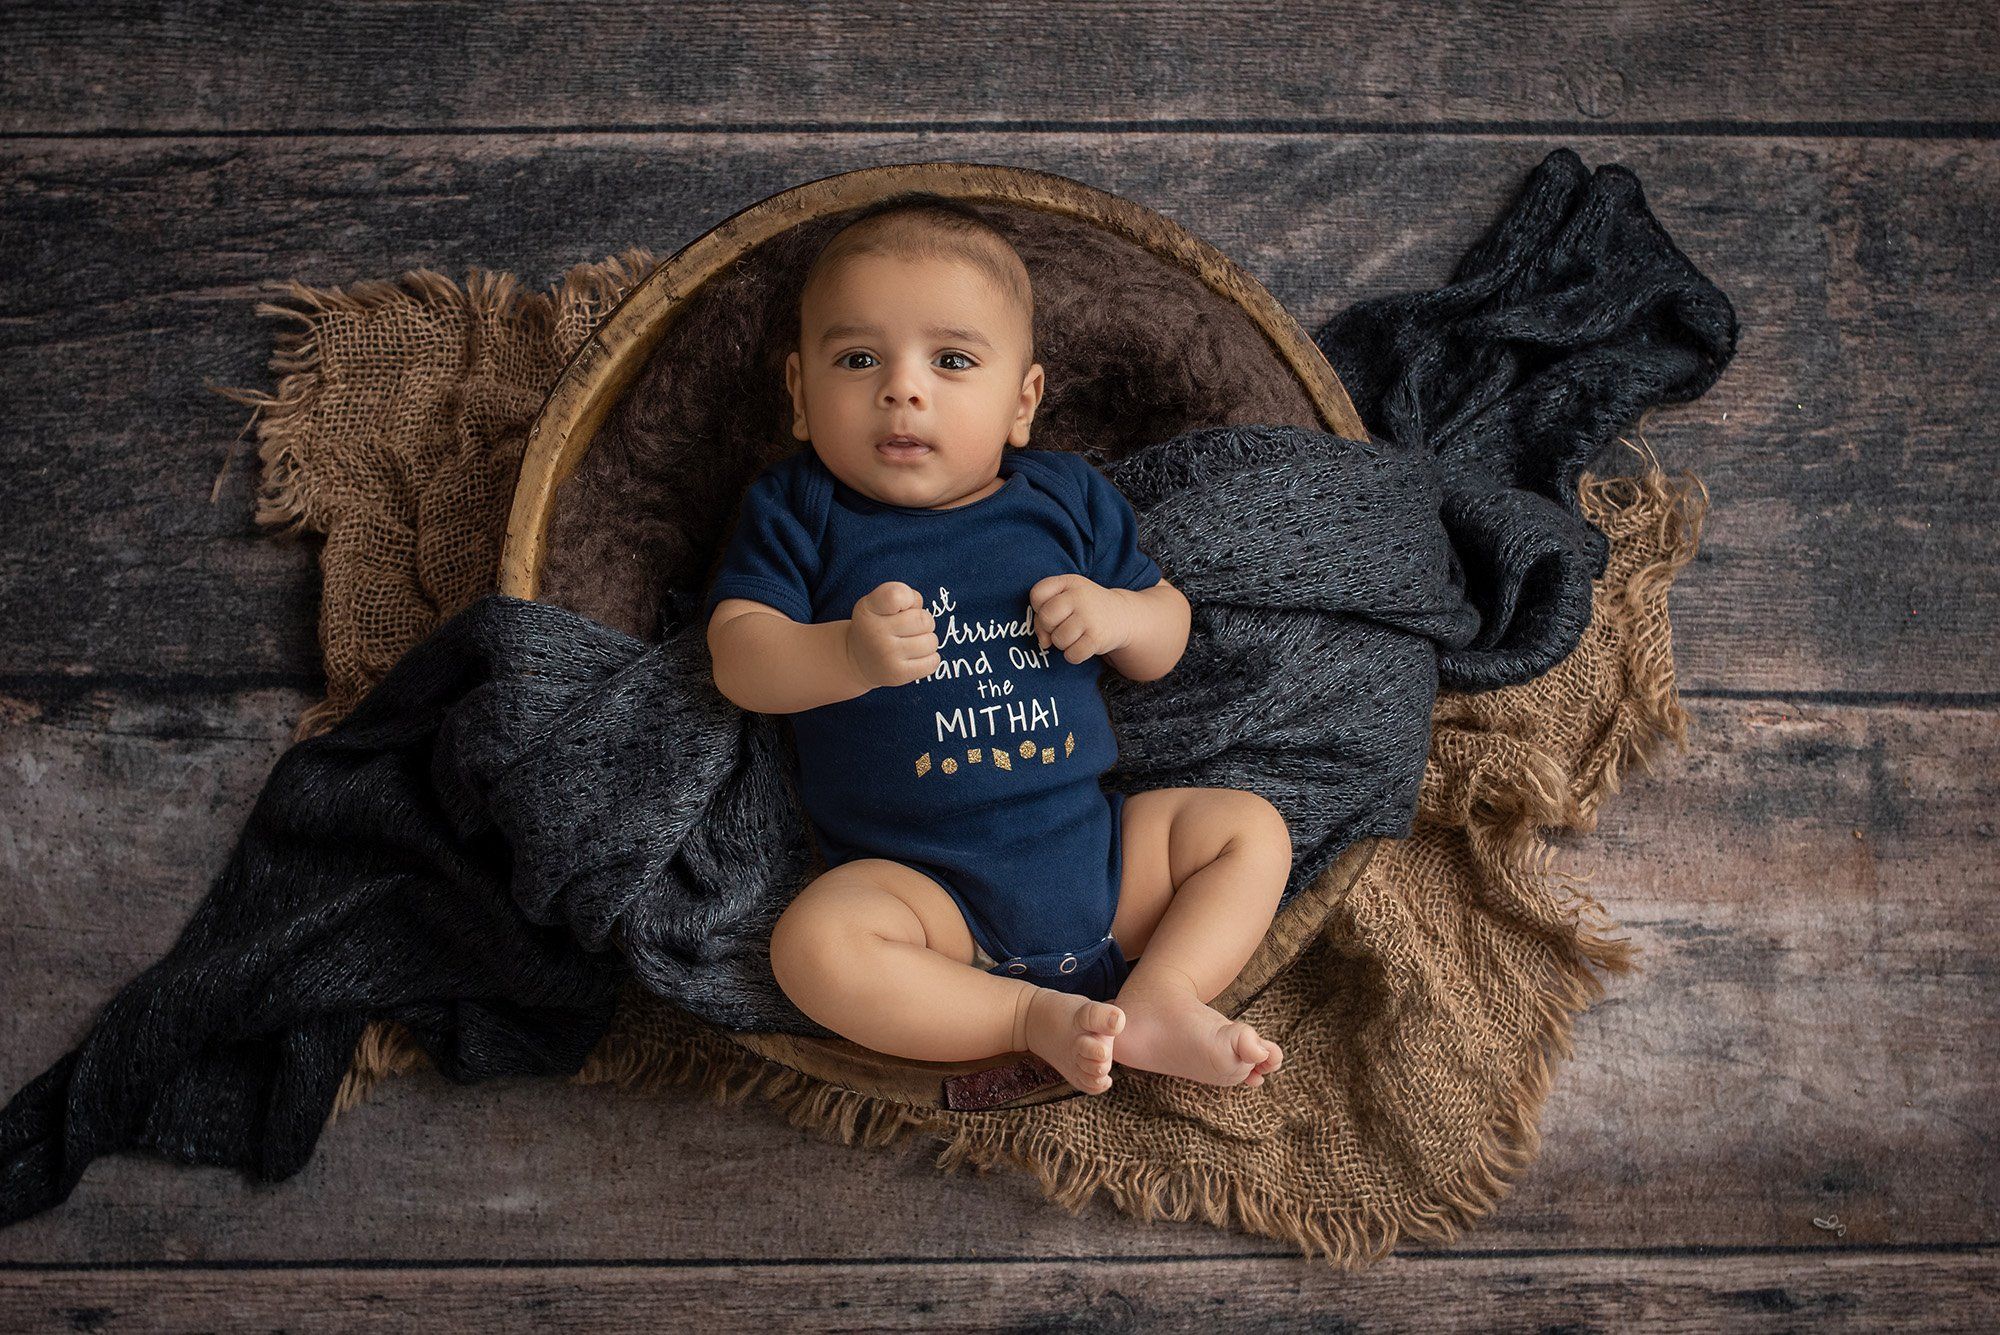 newborn baby boy wearing navy blue onesie laying inside wooden bowl with blue and brown blankets